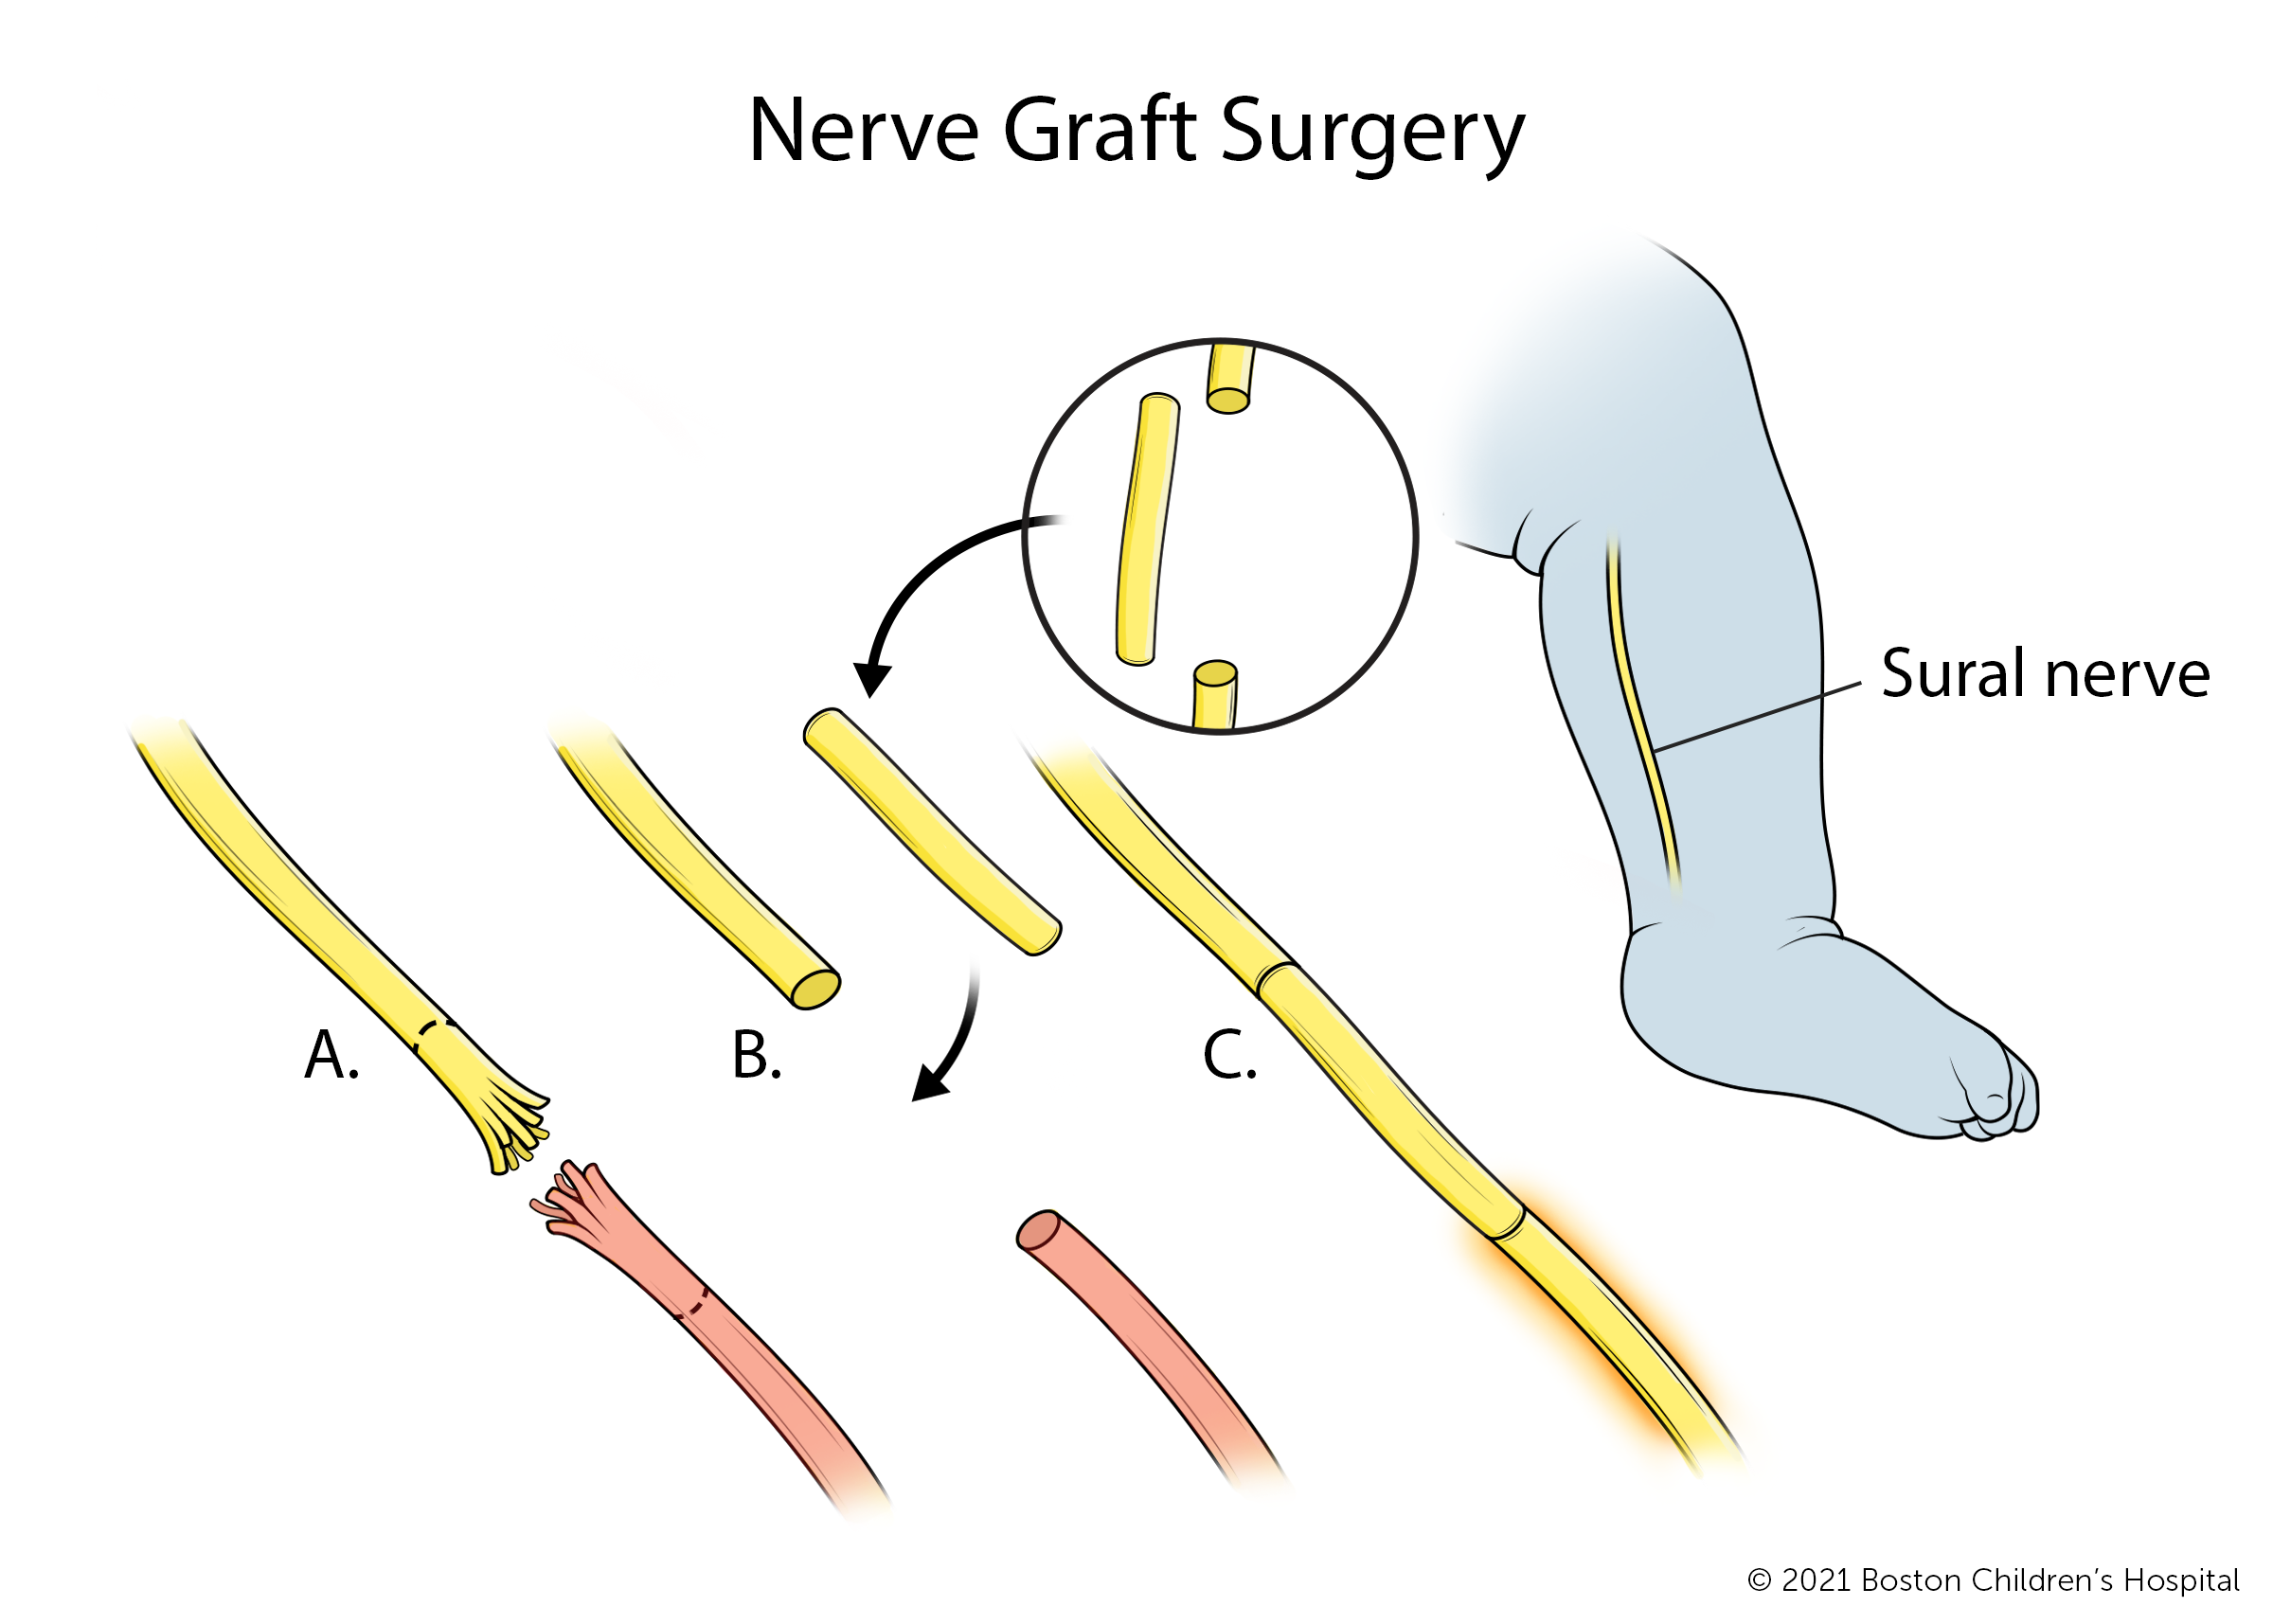 During nerve graft surgery, the injured portion of the brachial plexus nerve is removed and replaces with a section of sural nerve from the leg.